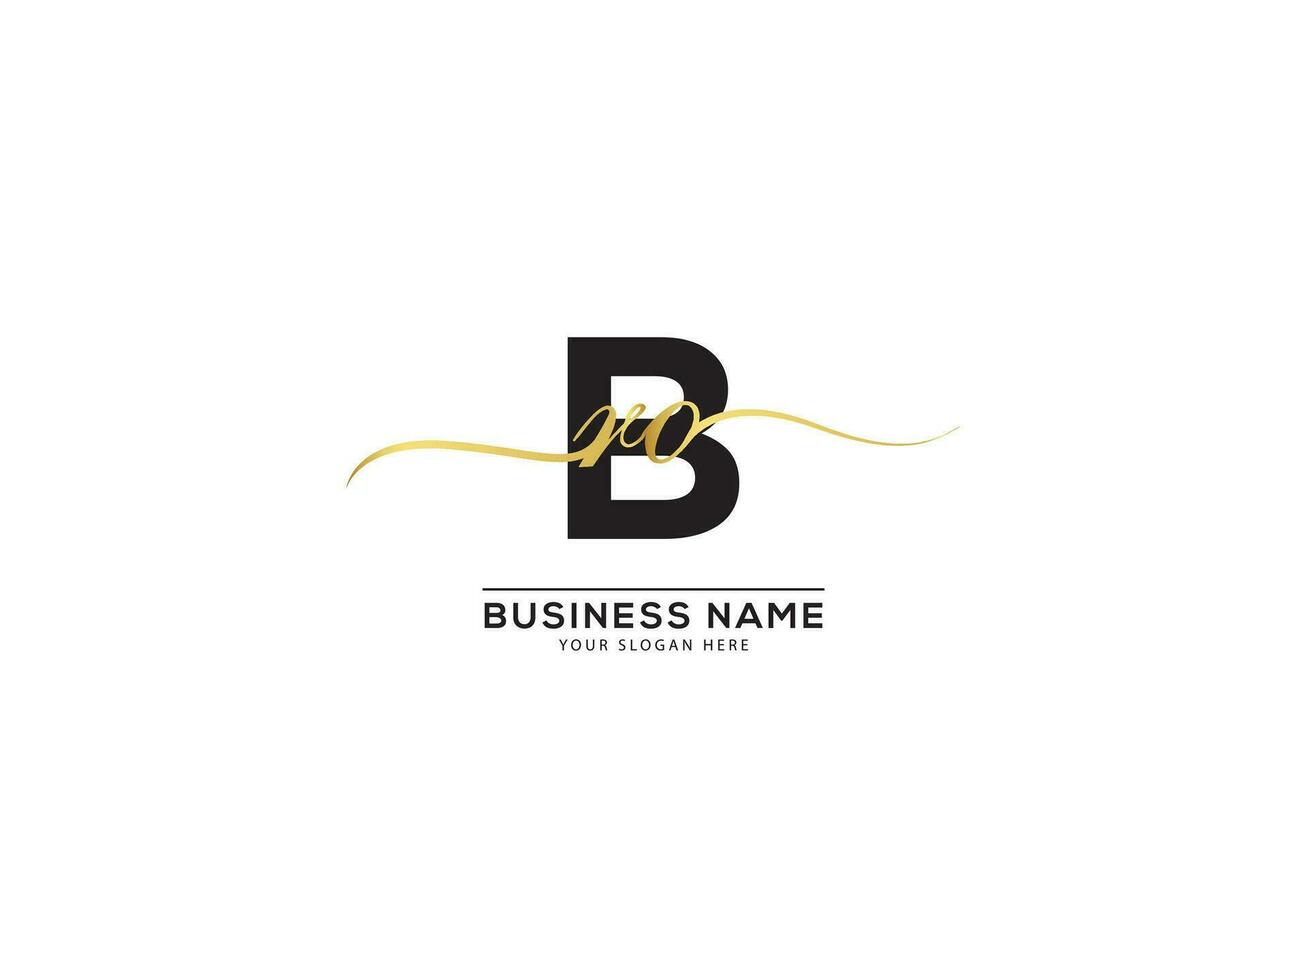 Typography BRO Logo Letter Vector For Business